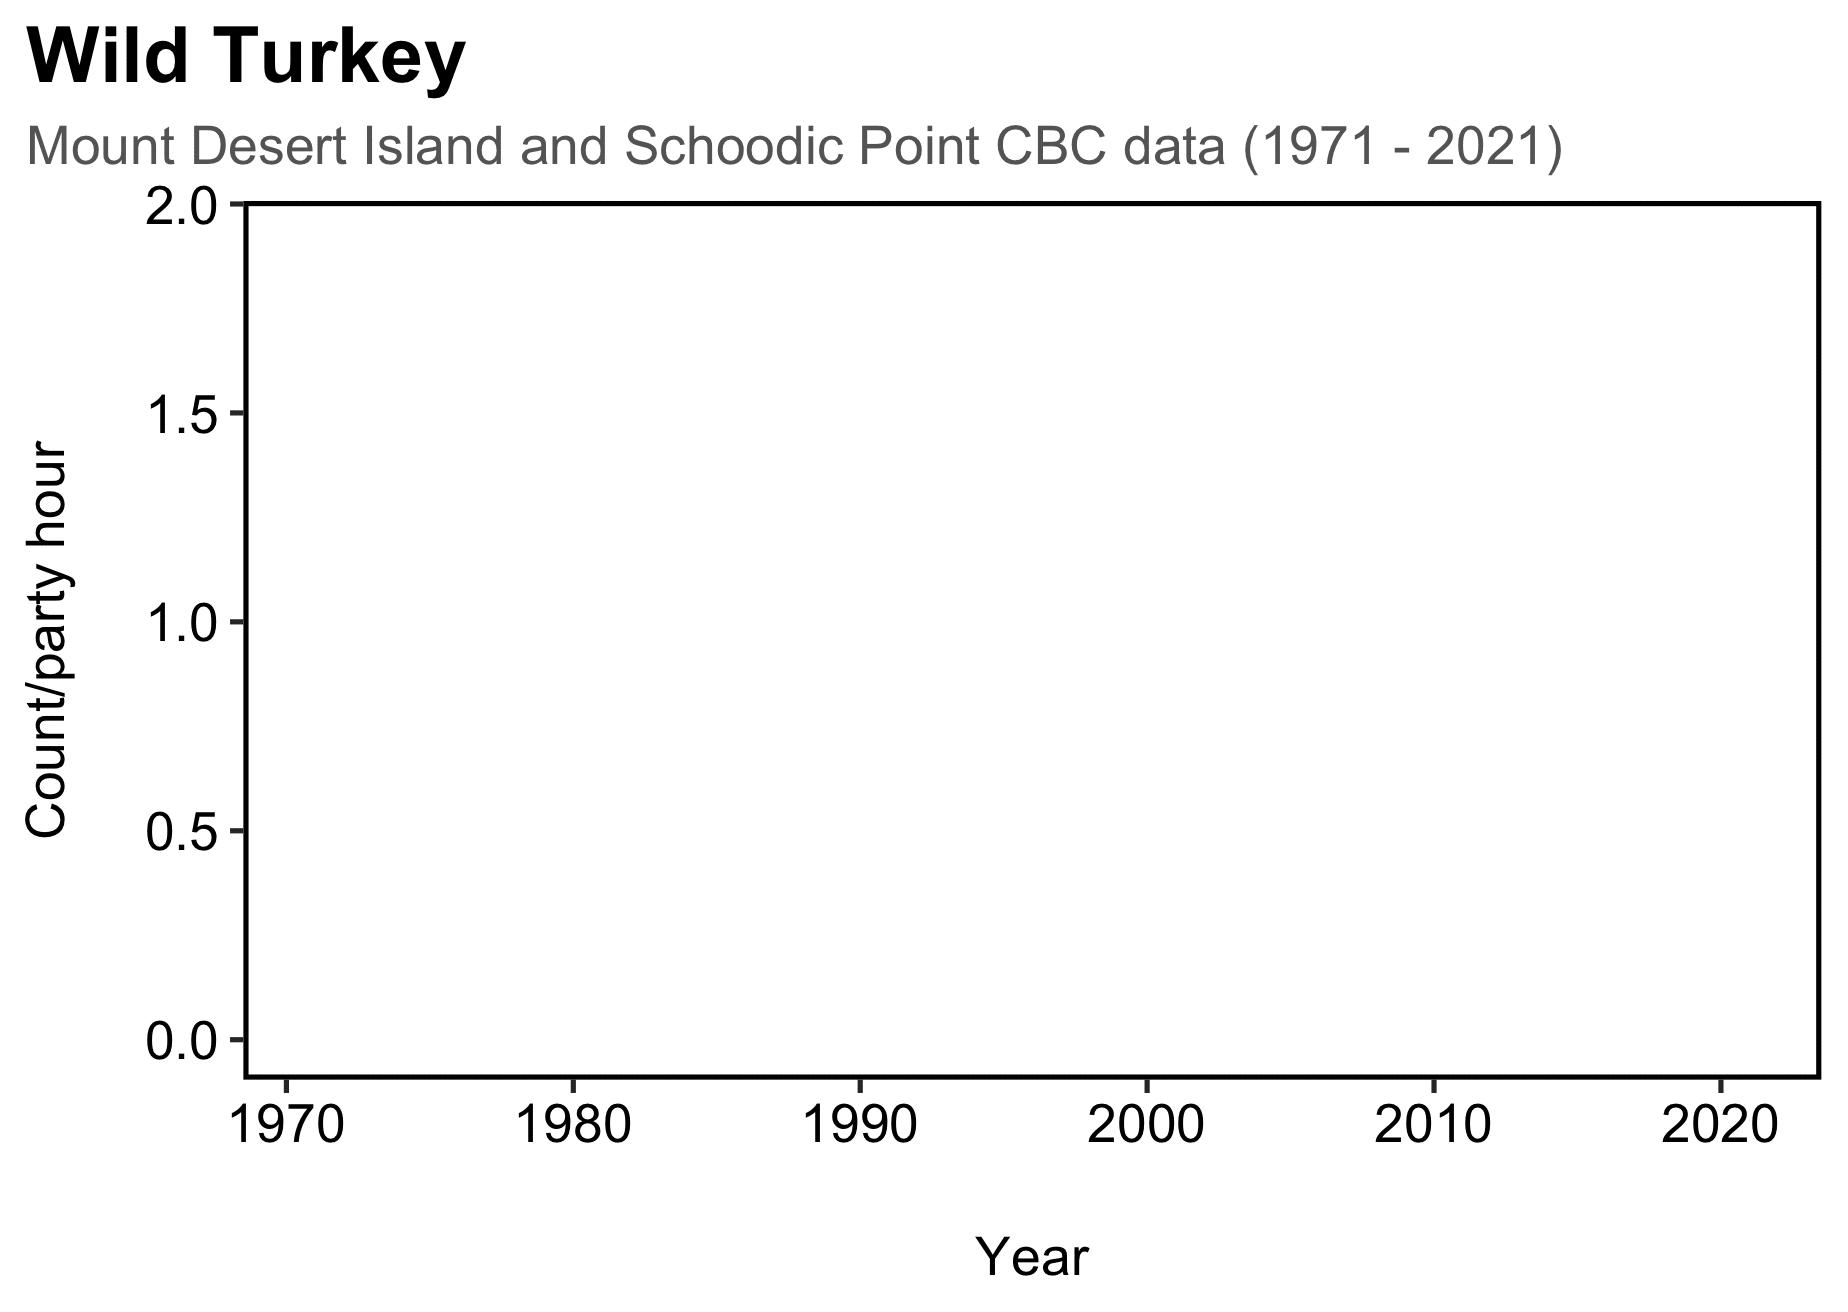 A GIF showing the trend of wild turkey populations through time. This species was first observed in the Acadia region in the late 1990s and has increased tremendously since, reaching almost 2 birds per hour of observer effort.